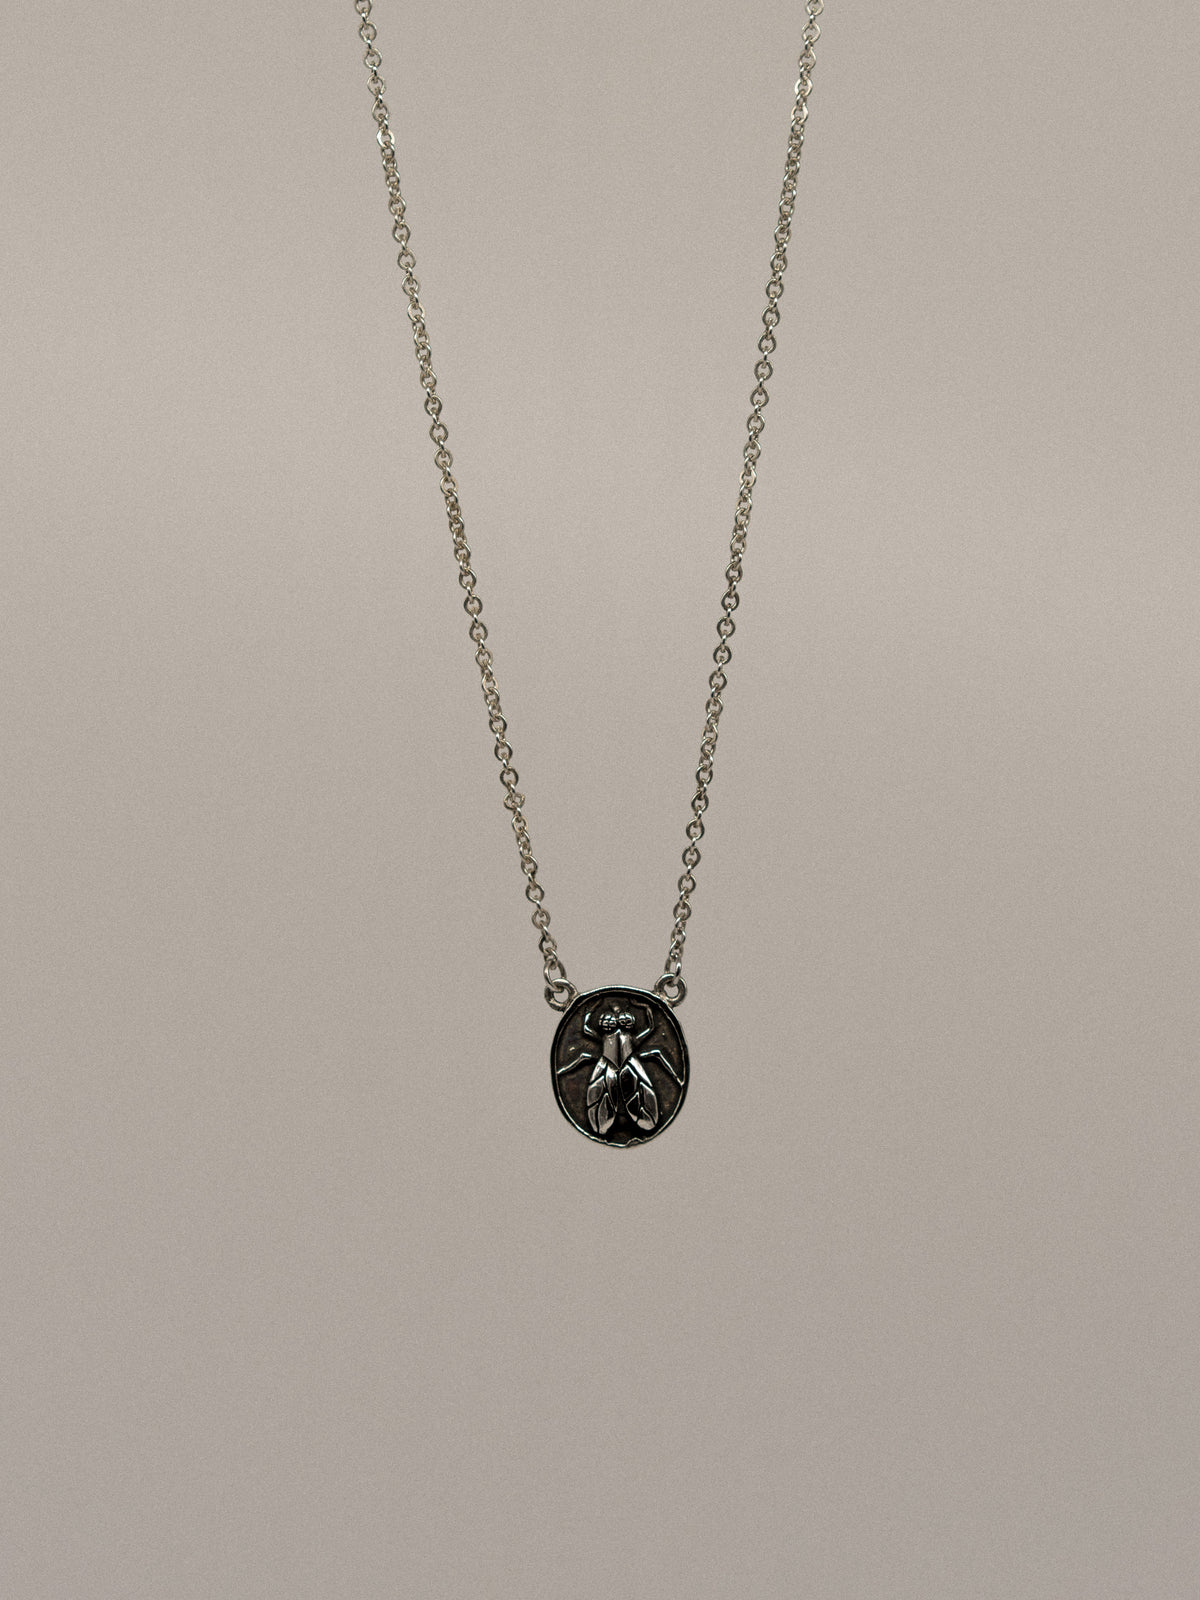 Fly pendant (With Chain)